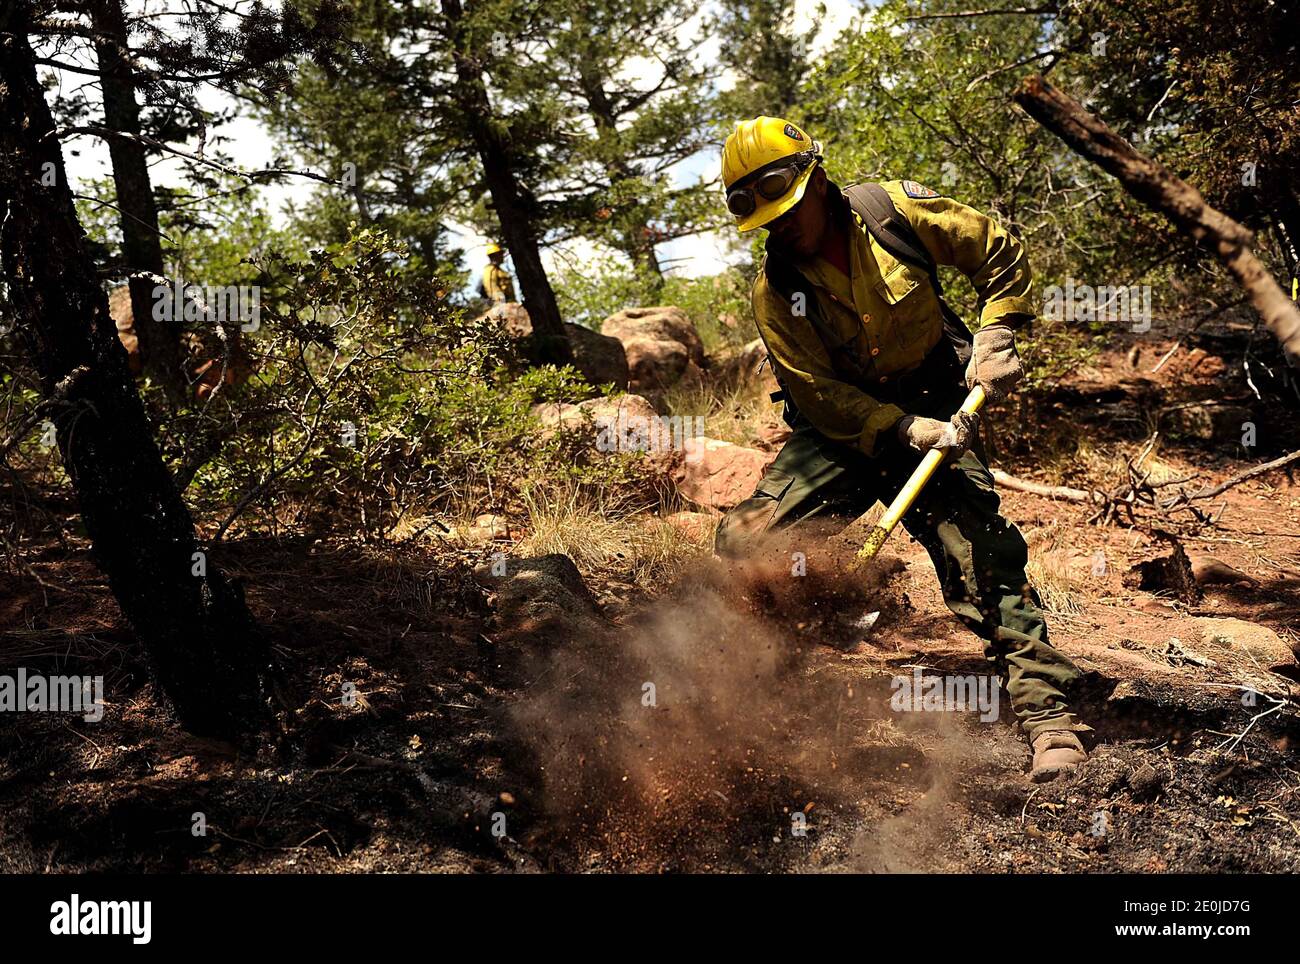 Vandenberg Air Force Base Hot Shot fire fighter Lupe Covarrubias cuts a fire line on June 28, 2012 in the Mount Saint Francois area of Colorado Springs, Co. while helping to battle several fires in Waldo Canyon. The Waldo Canyon fire has grown to 18,500 acres and burned over 300 homes. Currently, more than 90 firefighters from the Academy, along with assets from Air Force Space Command; F.E. Warren Air Force Base, Wyo.; Fort Carson, Colo.; and the local community continue to fight the Waldo Canyon fire. Photo by U.S. Air Force via ABACAPRESS.COM Stock Photo